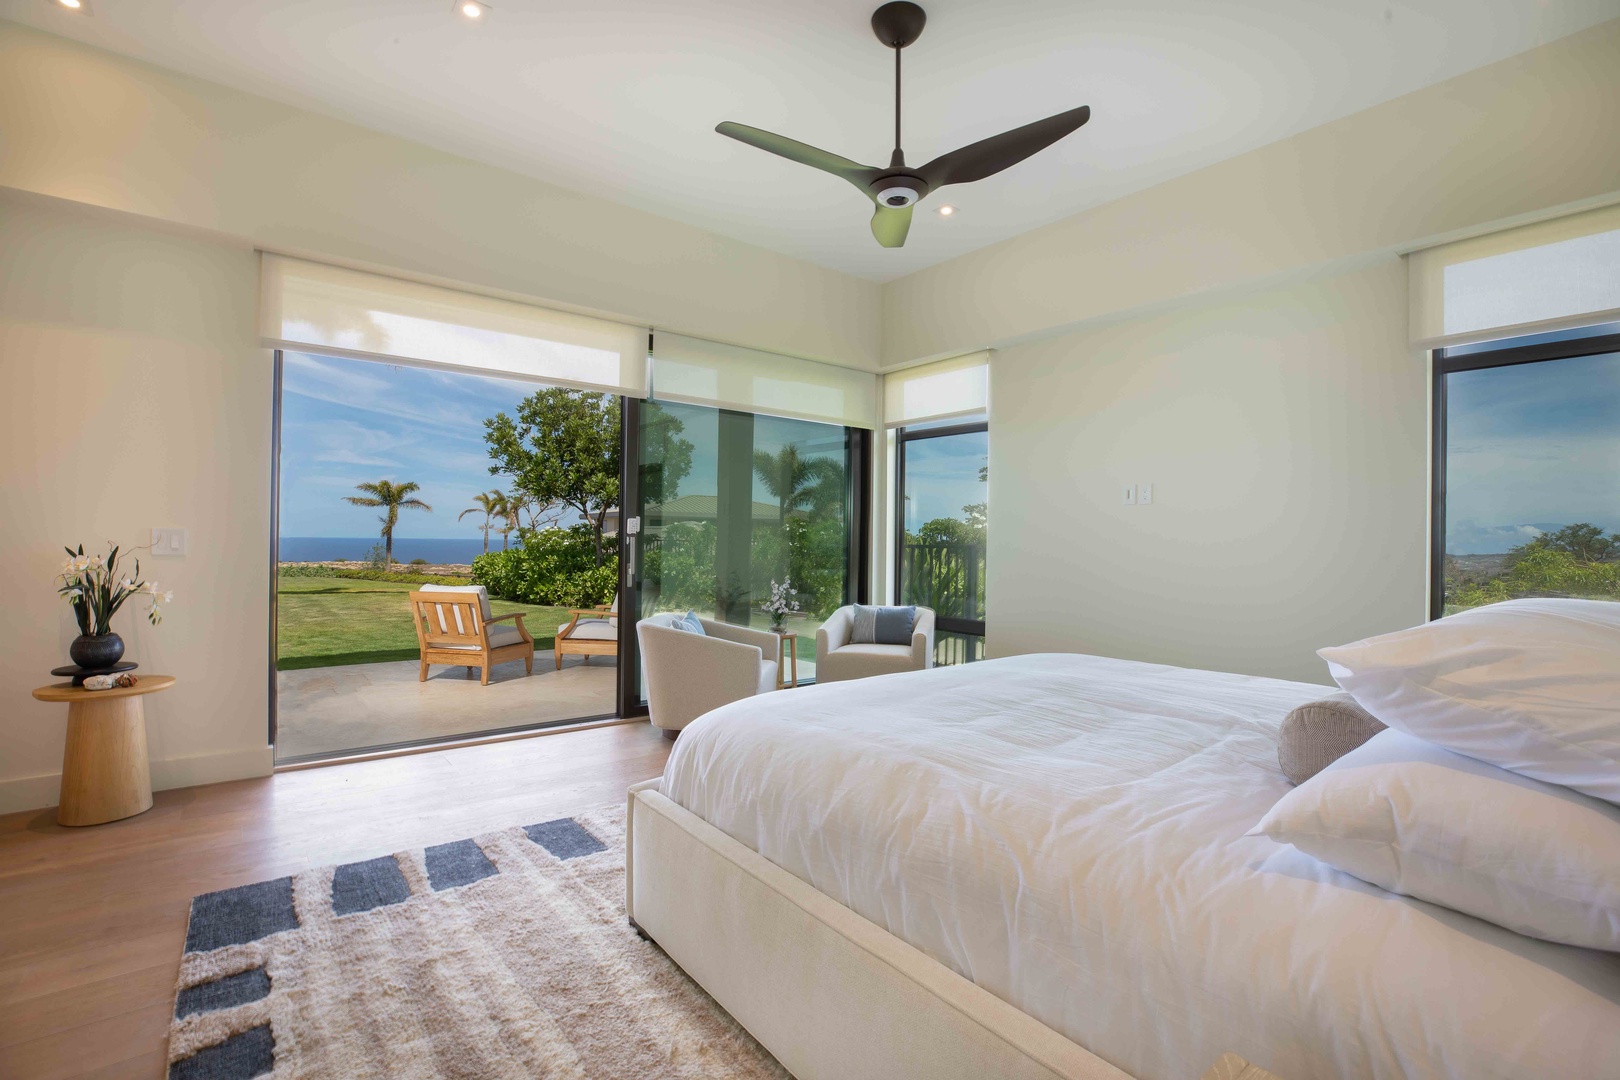 Kamuela Vacation Rentals, Hapuna Estates #8 - Primary Suite 1 offers ocean views and a private lanai